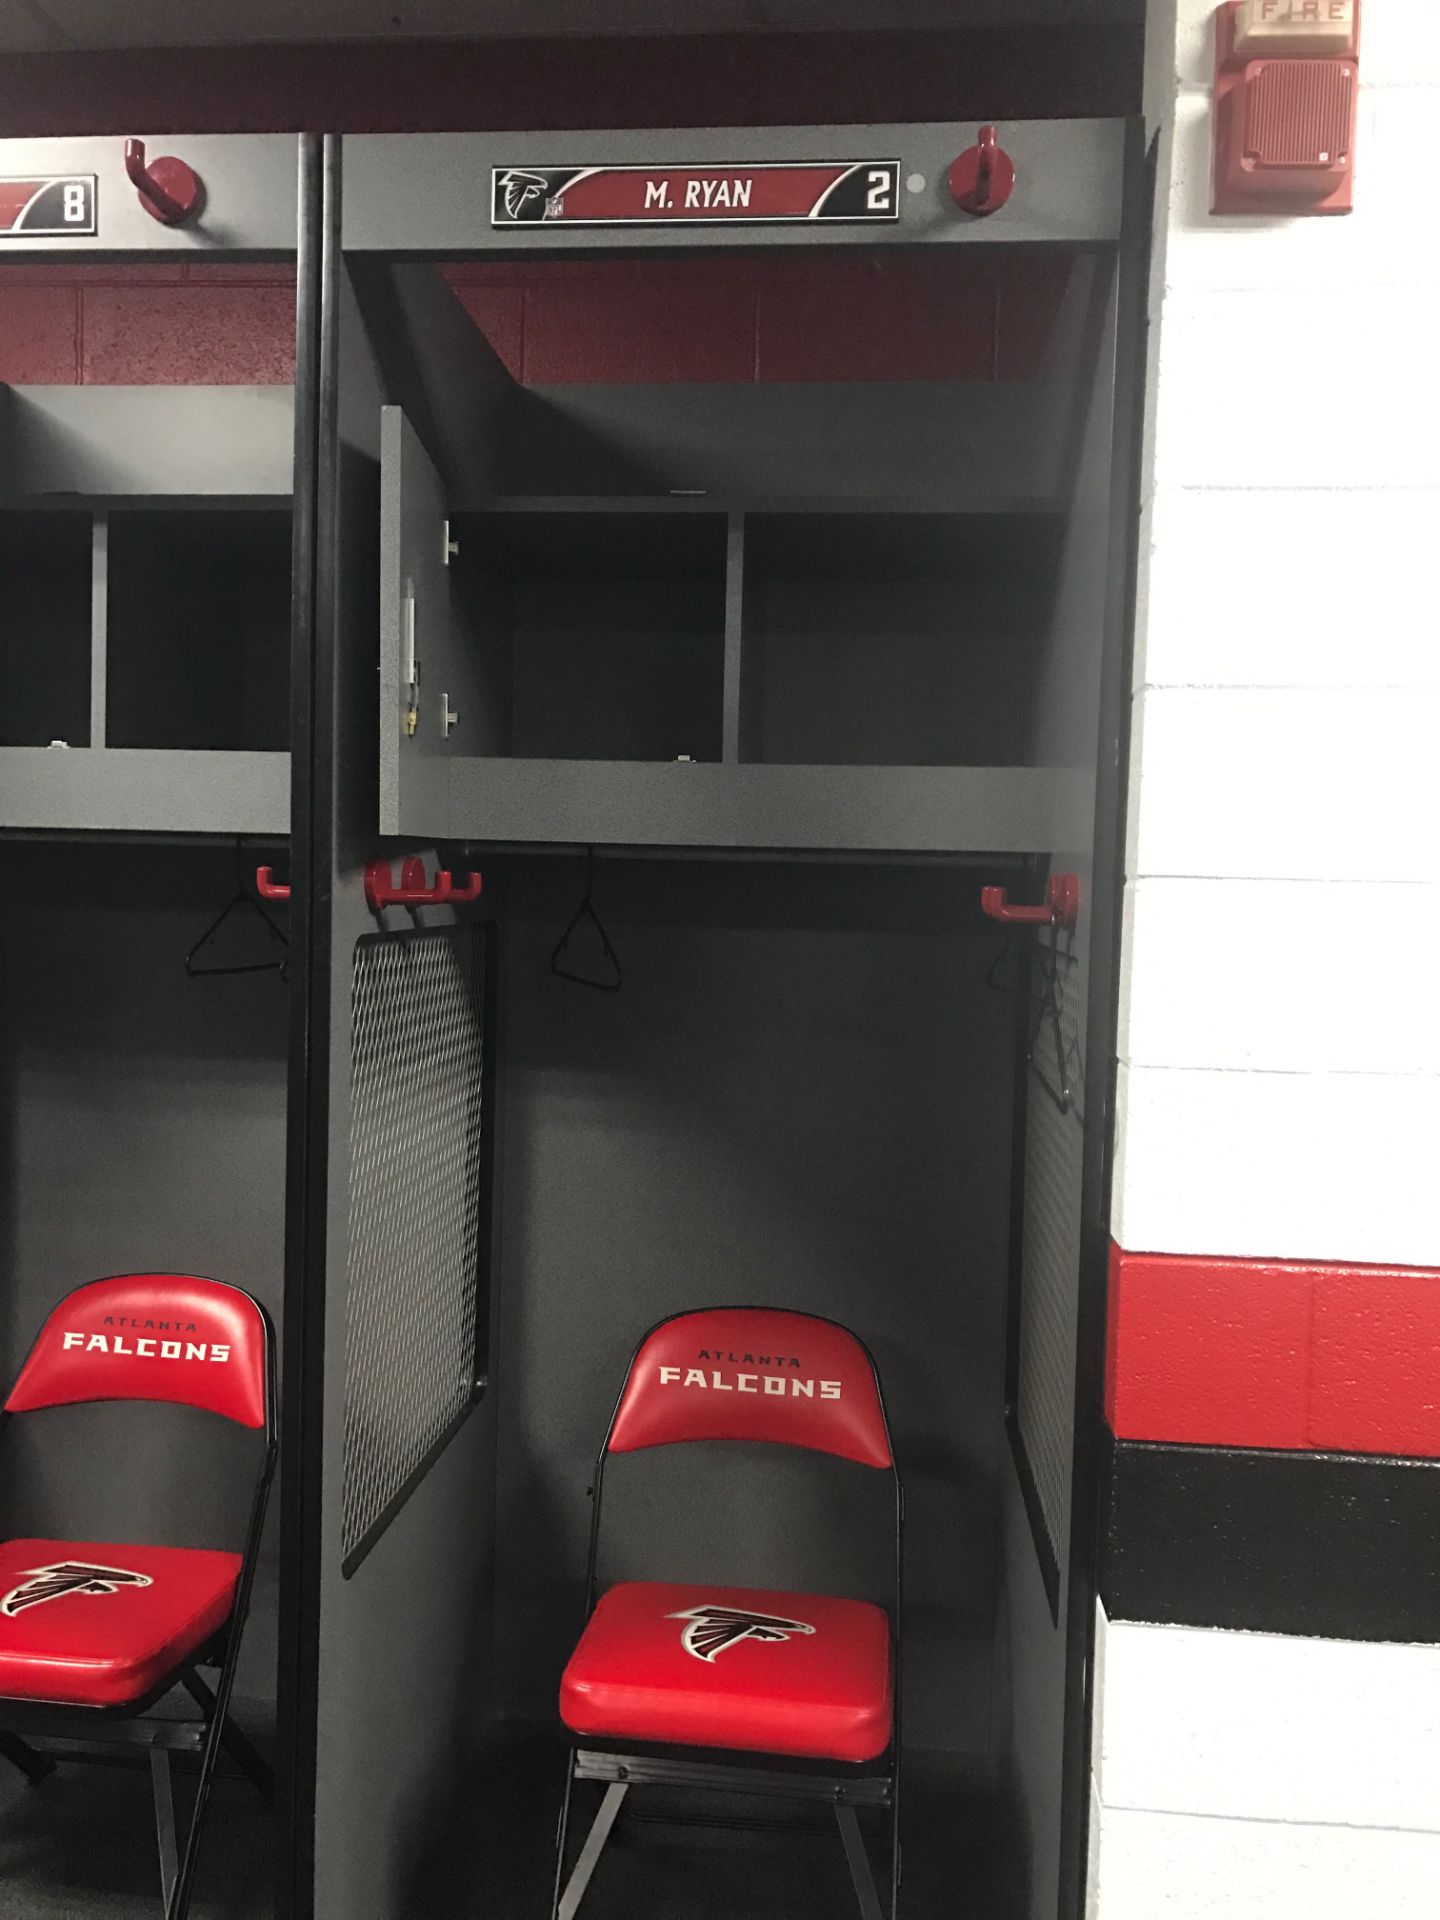 Matt Ryan's Locker, includes Name Tag as photo'd. Does NOT include Chair. Removed from Falcons